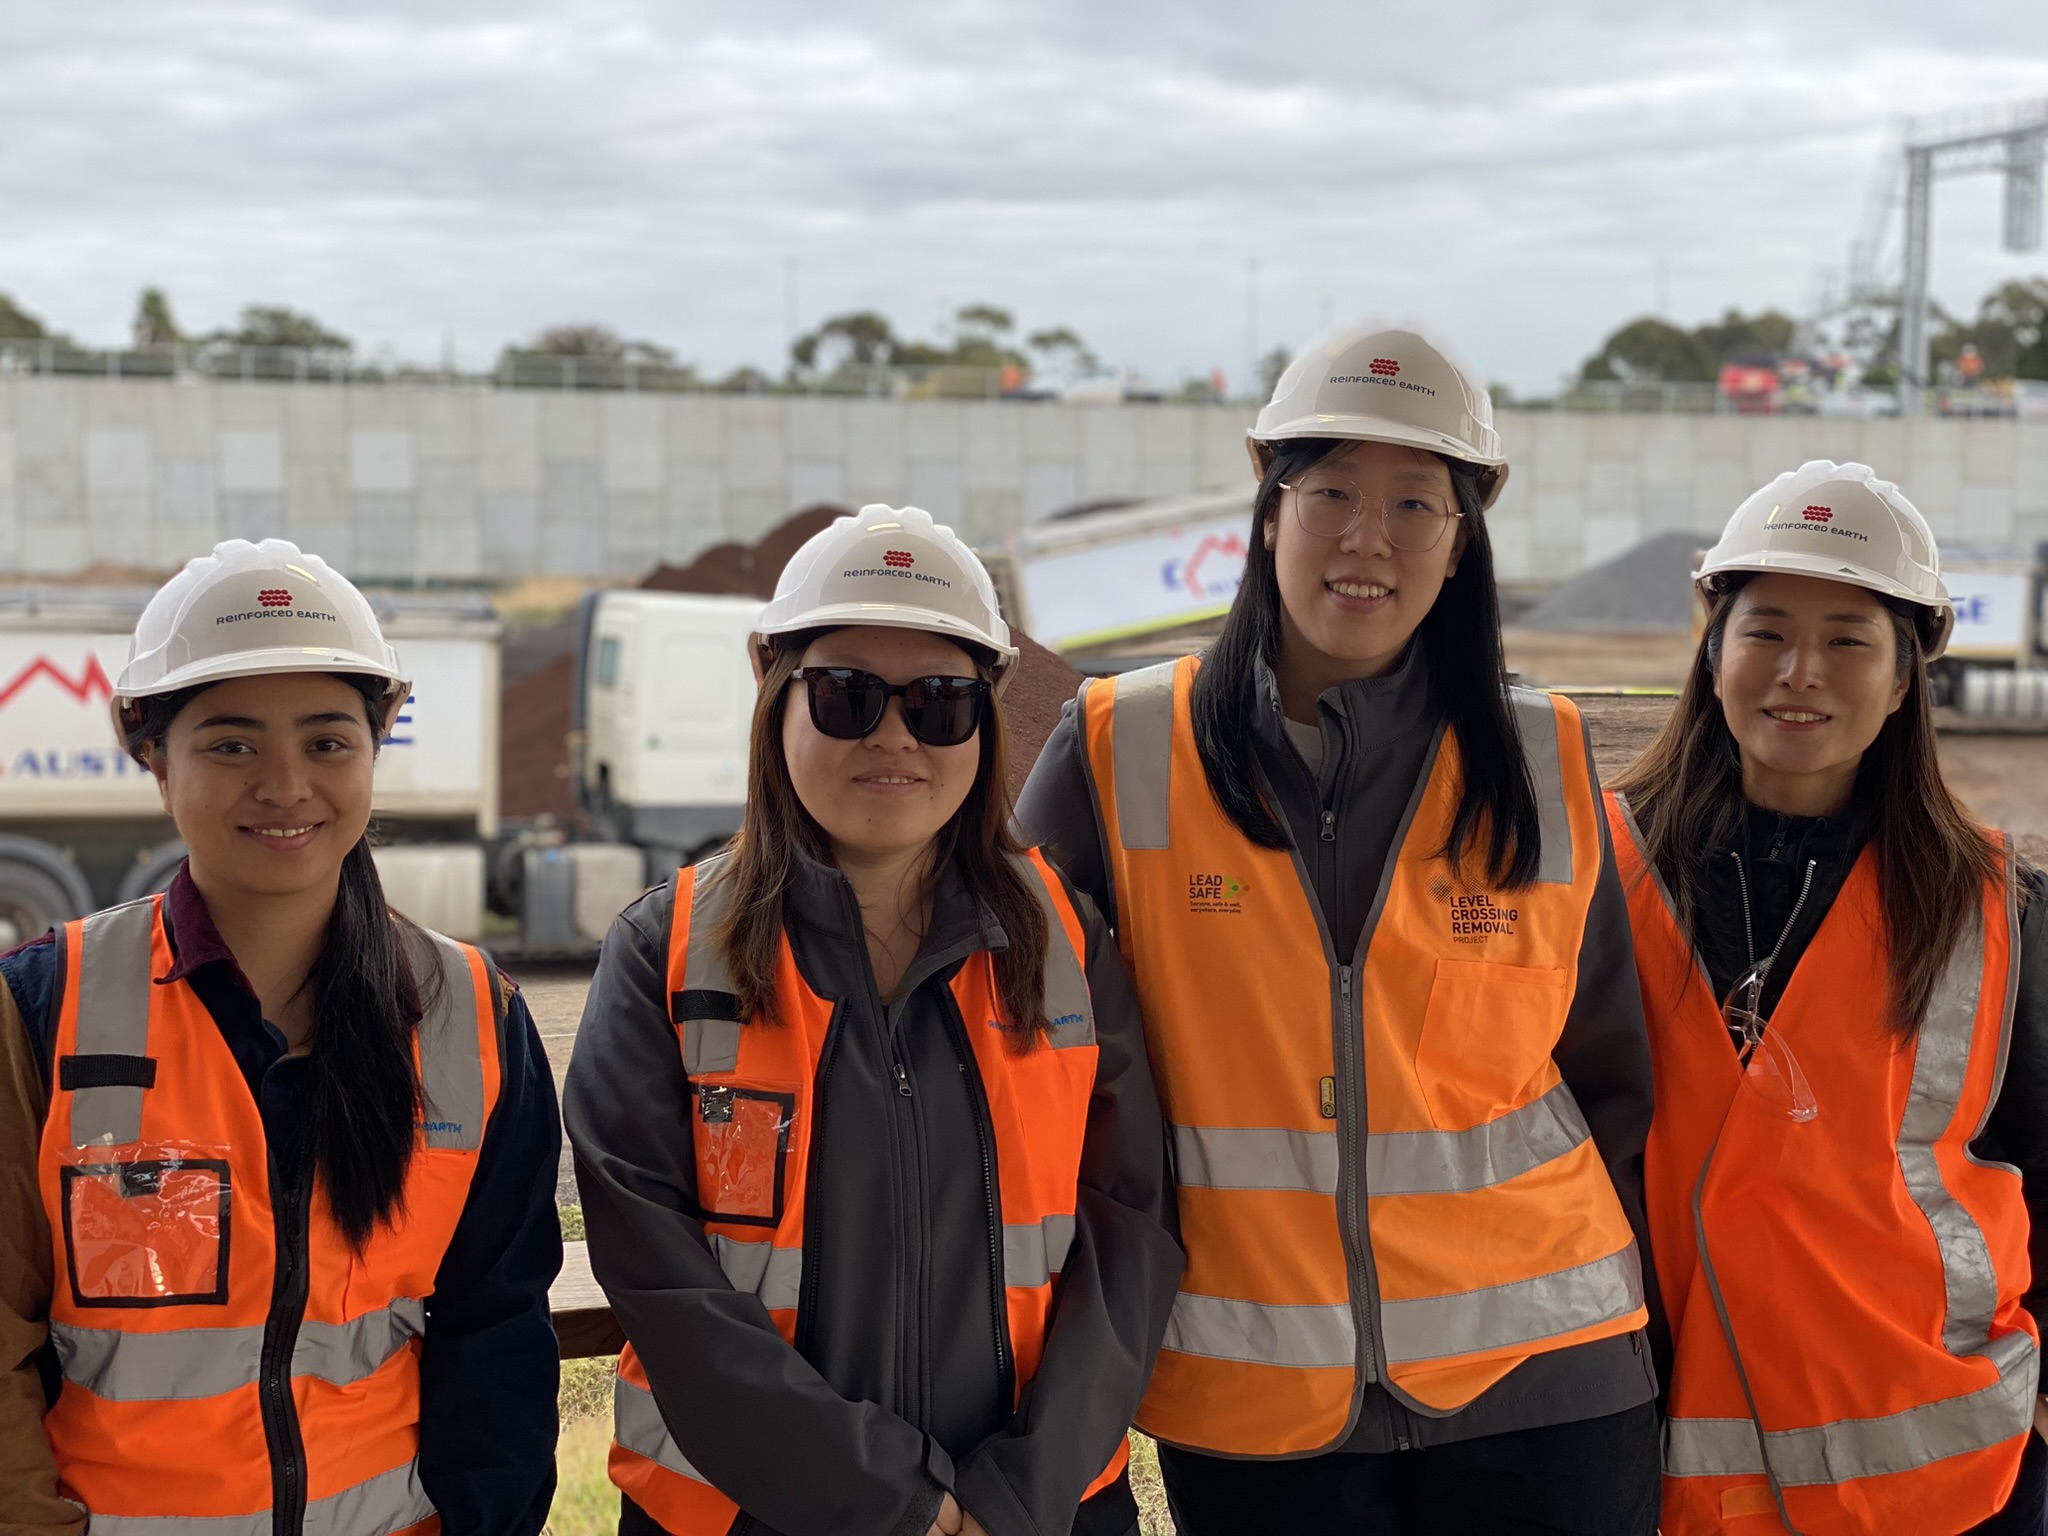 Reinforced Earth design engineers visit the Reinforced Earth walls made of precast concrete and soil interaction structural supports at the South Geelong to Waurn Ponds Duplication Rail Project in Victoria, Australia